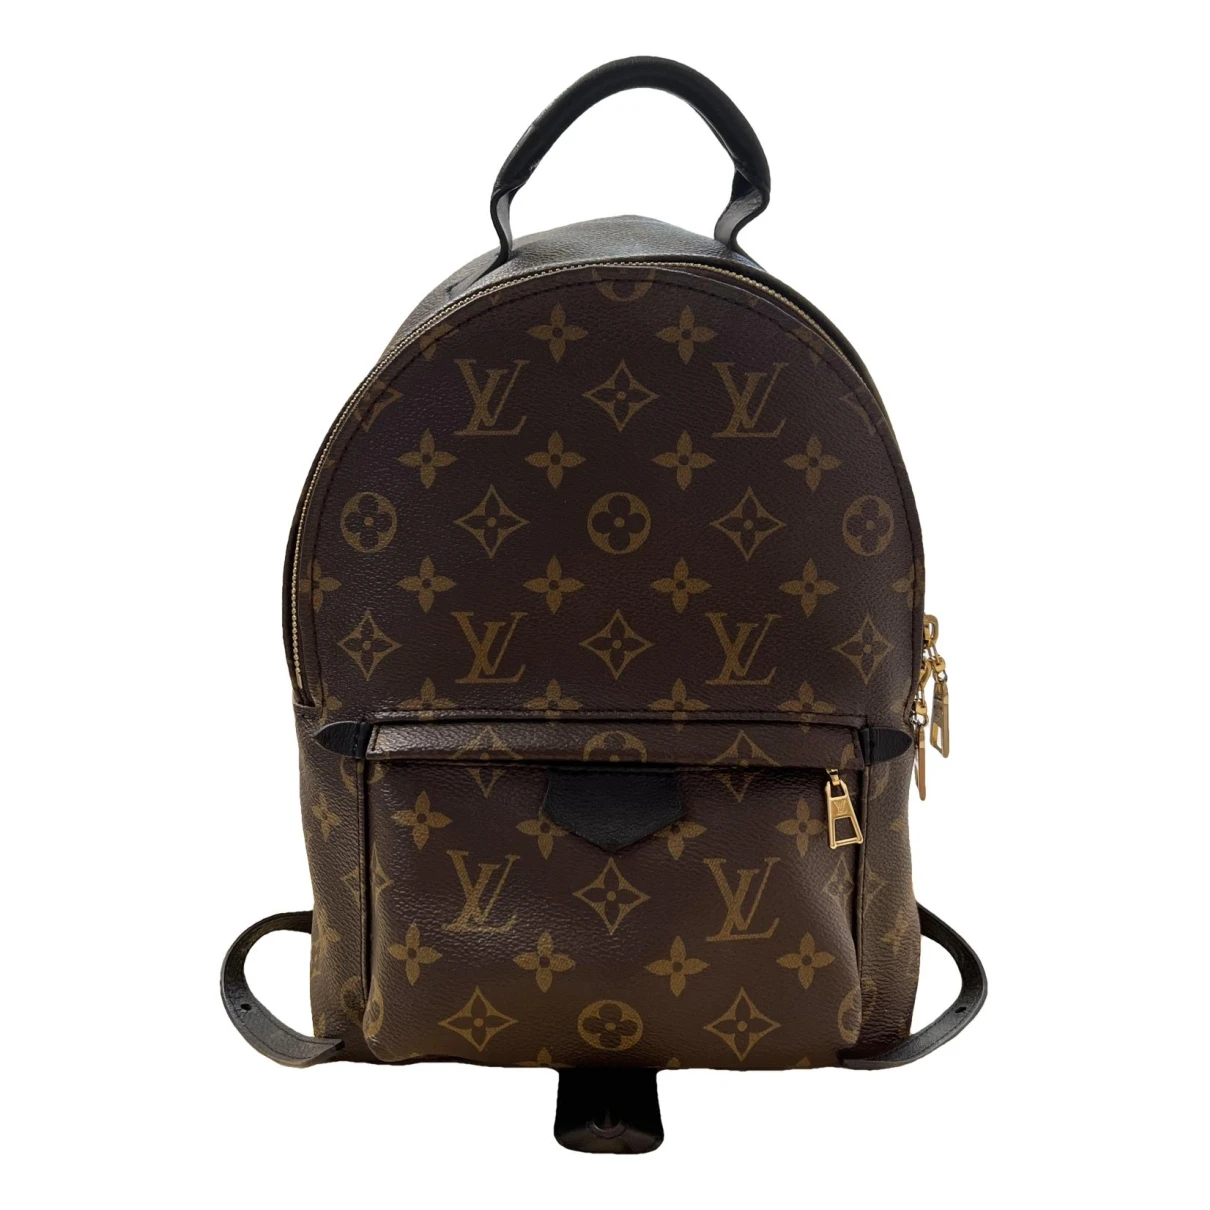 bags Louis Vuitton backpacks Palm Springs for Female Leather. Used condition